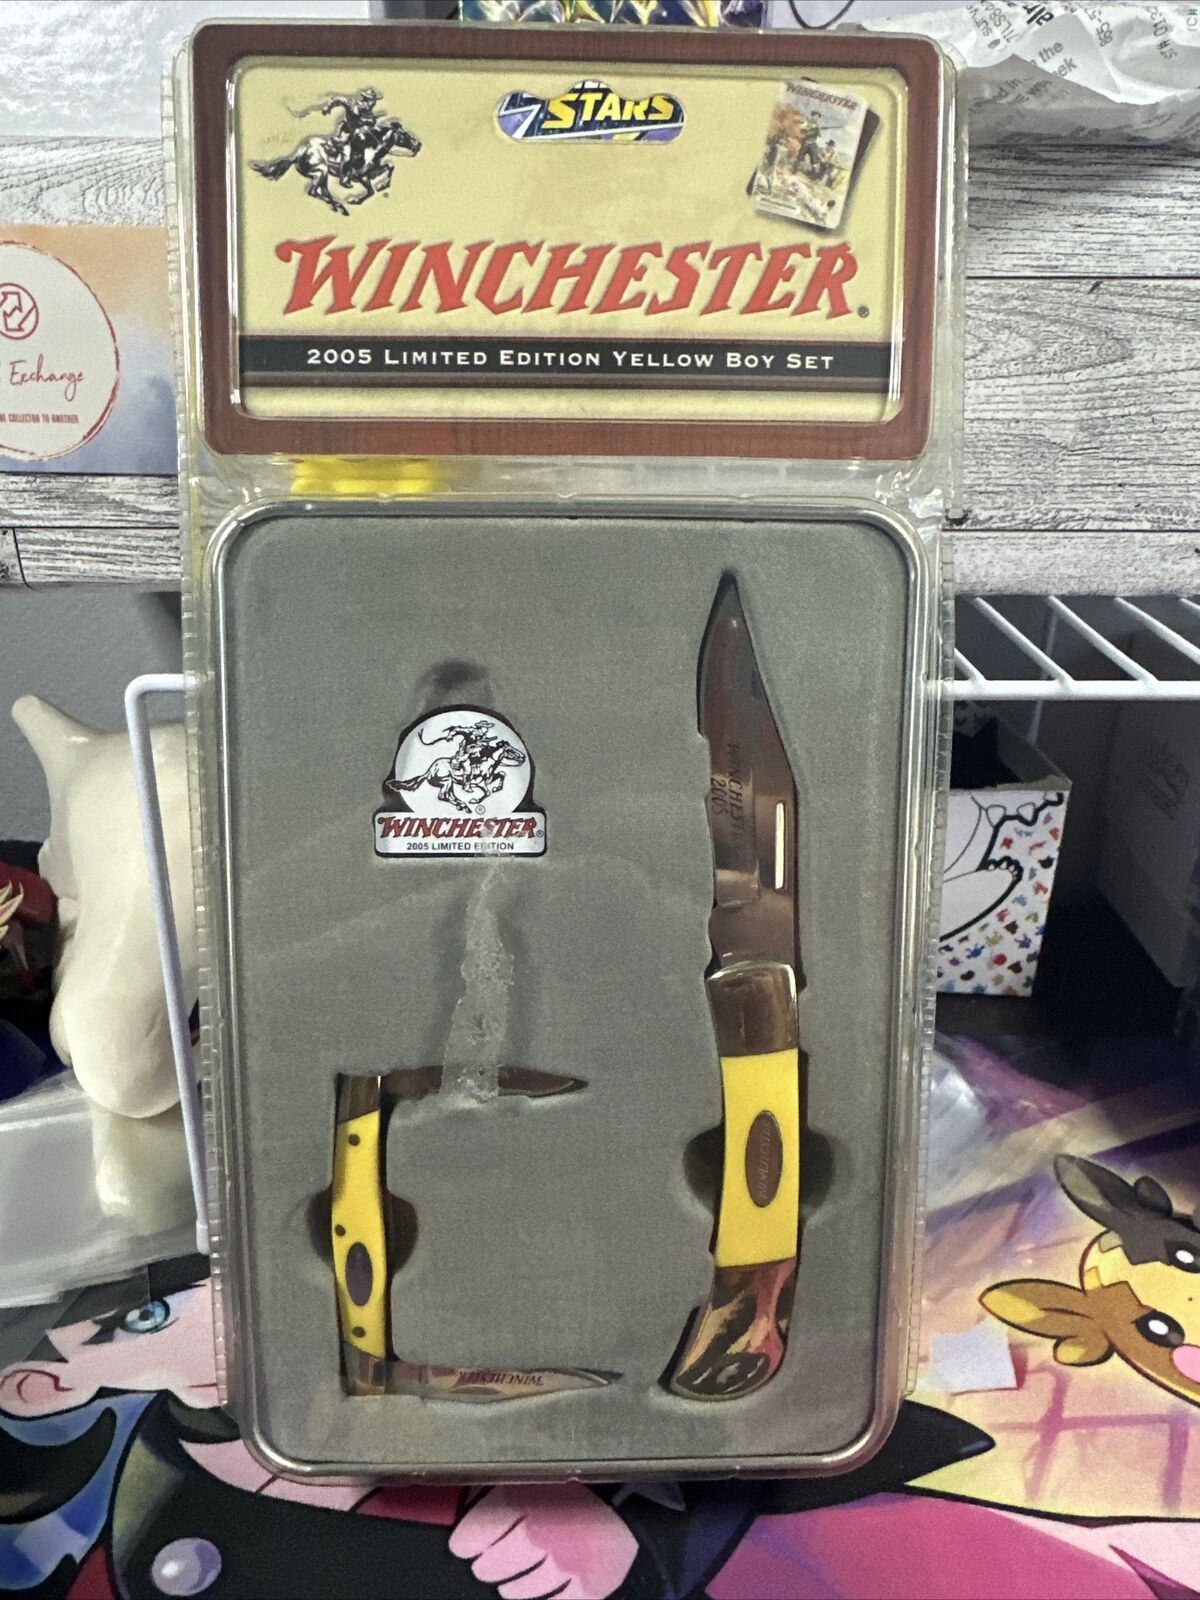 2005 Limited Edition Winchester 2 Knife Yellow Boy Set In Tin In Package NEW